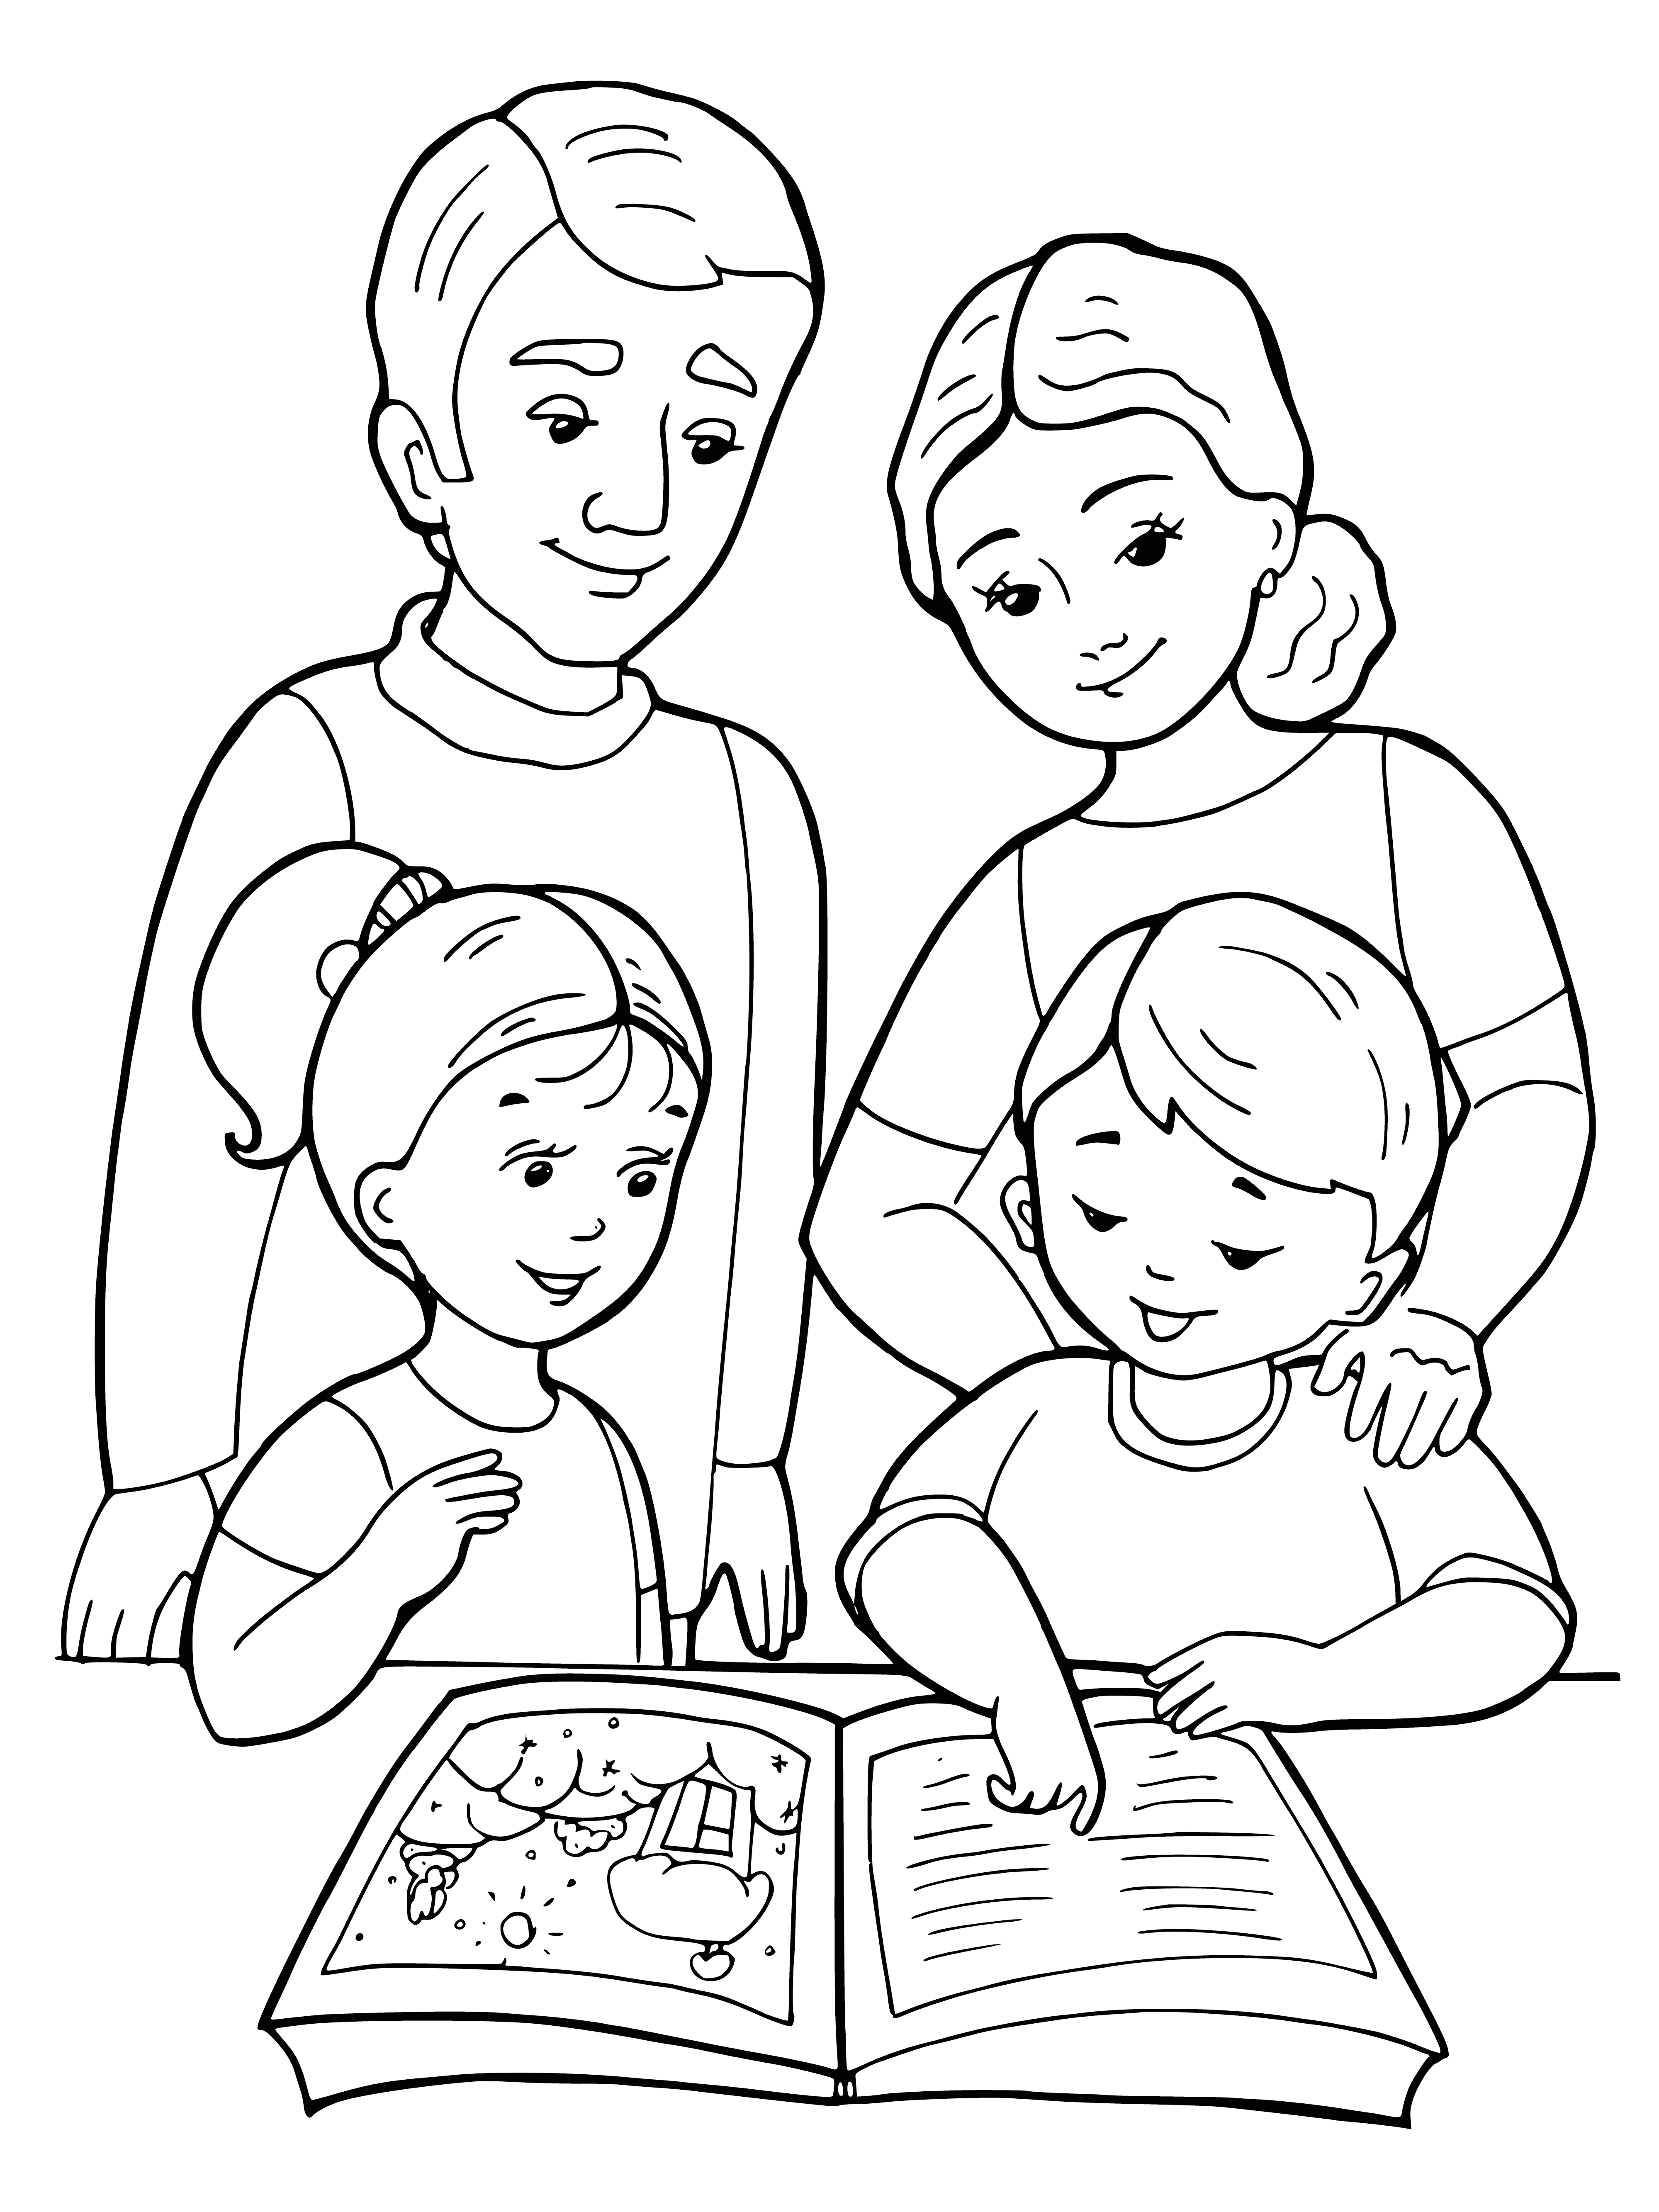 A family coloring page